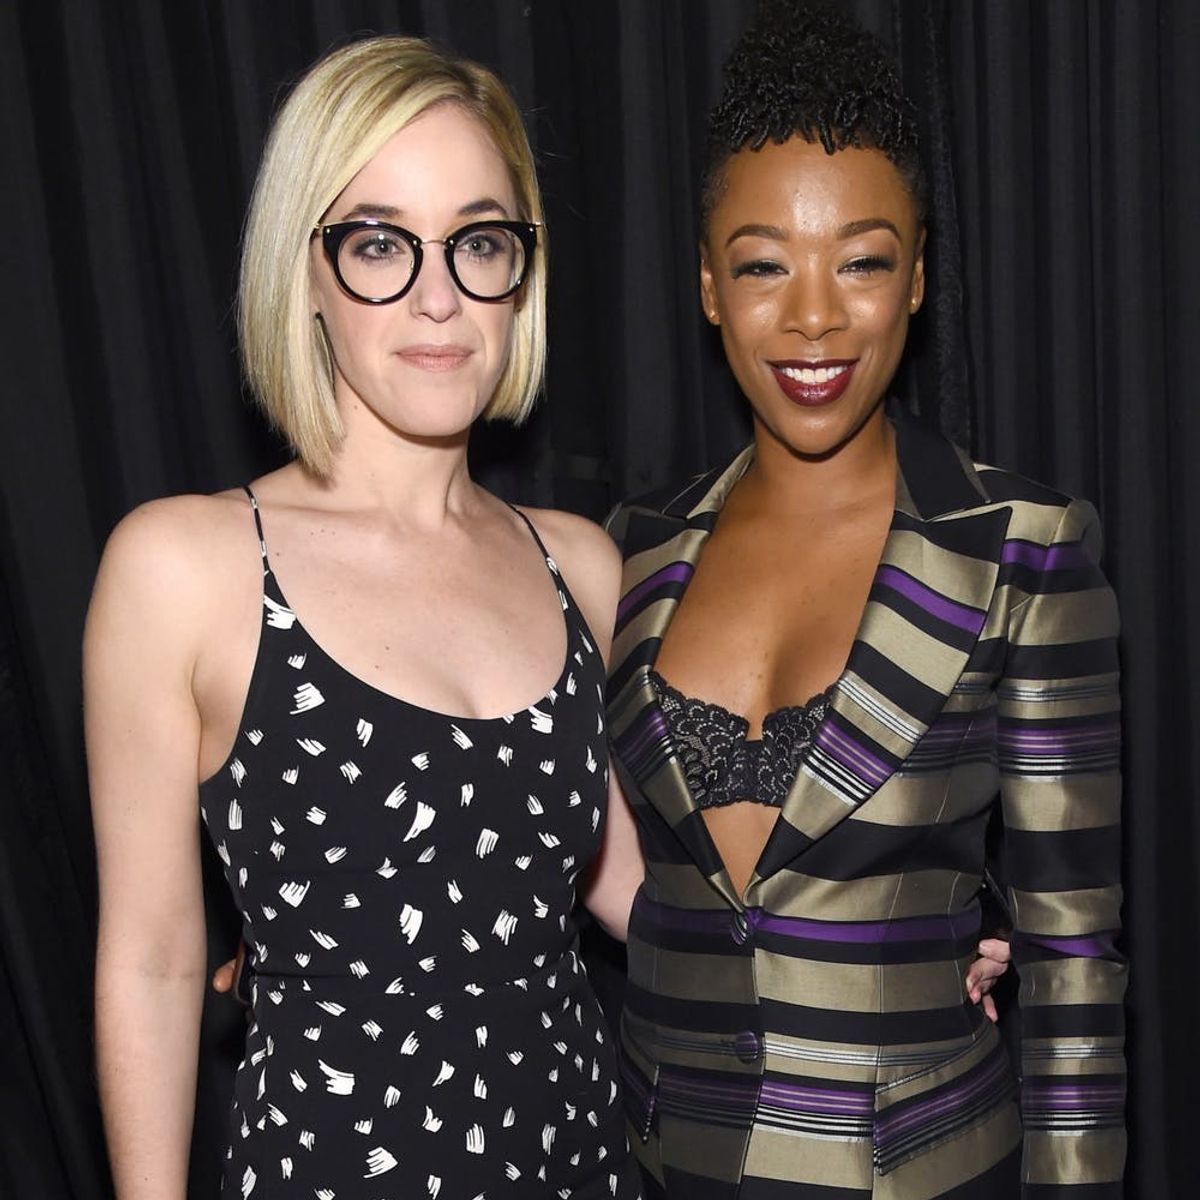 OITNB’s Samira Wiley and Lauren Morelli Just Got Hitched in the Dreamiest Wedding Designs Ever